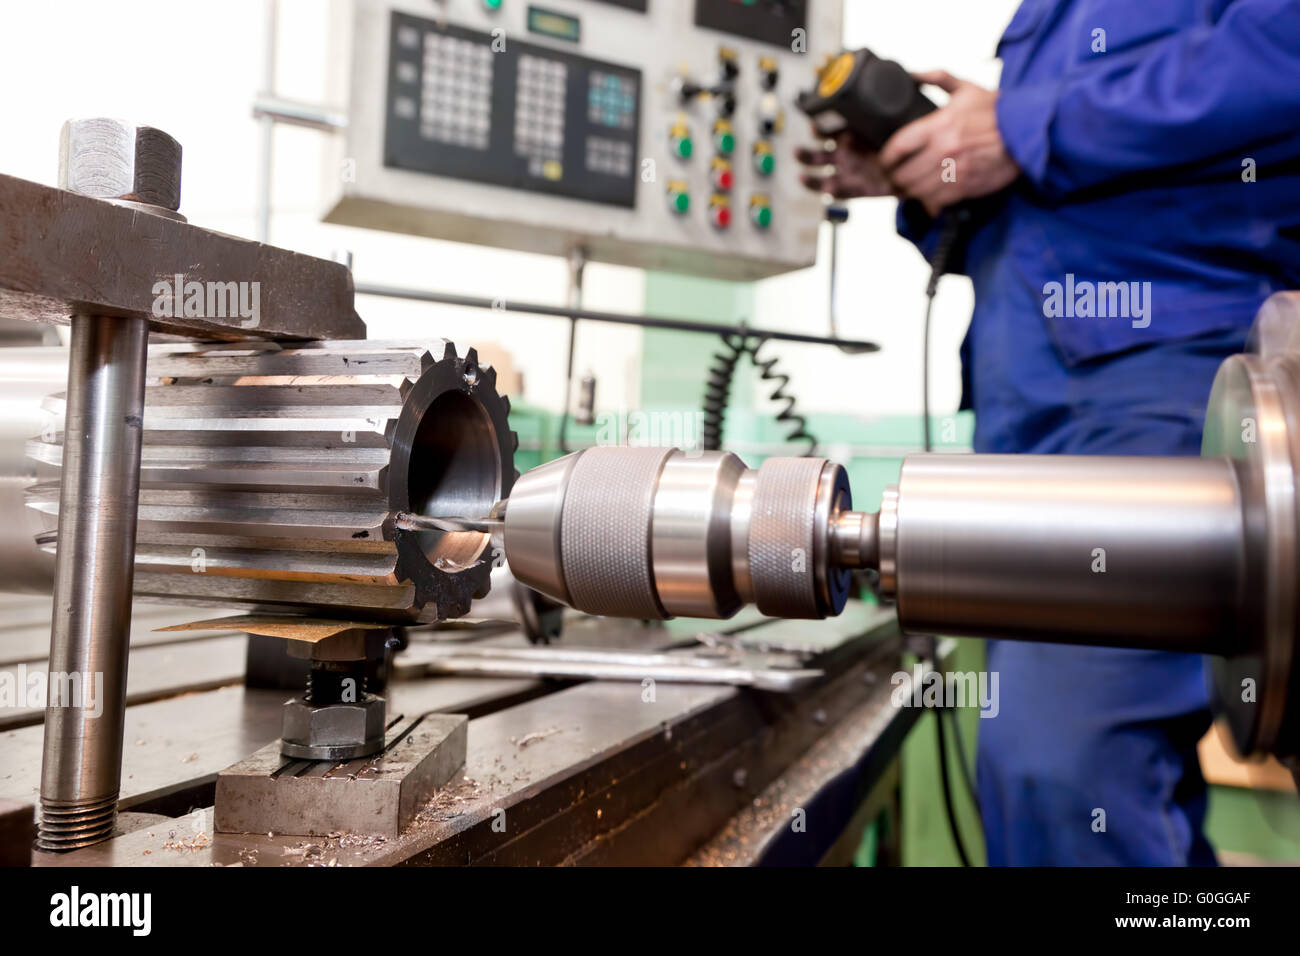 Man operating CNC drilling and boring machine. Industry Stock Photo